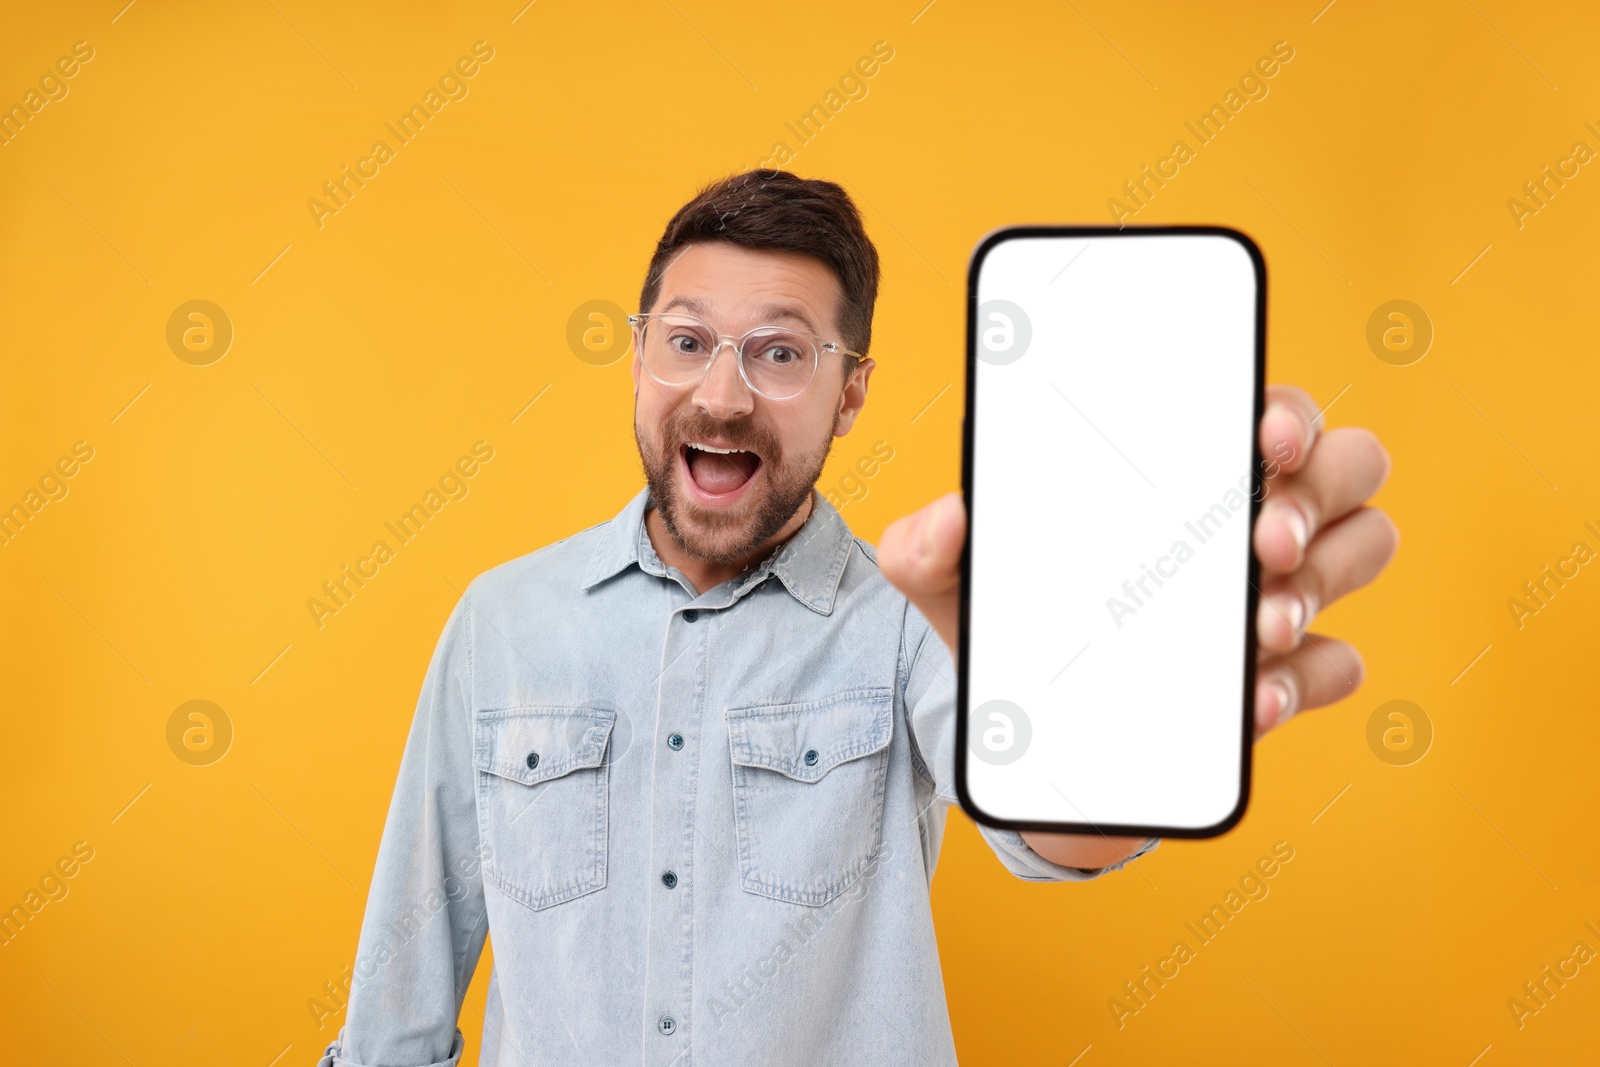 Photo of Surprised man showing smartphone in hand on yellow background